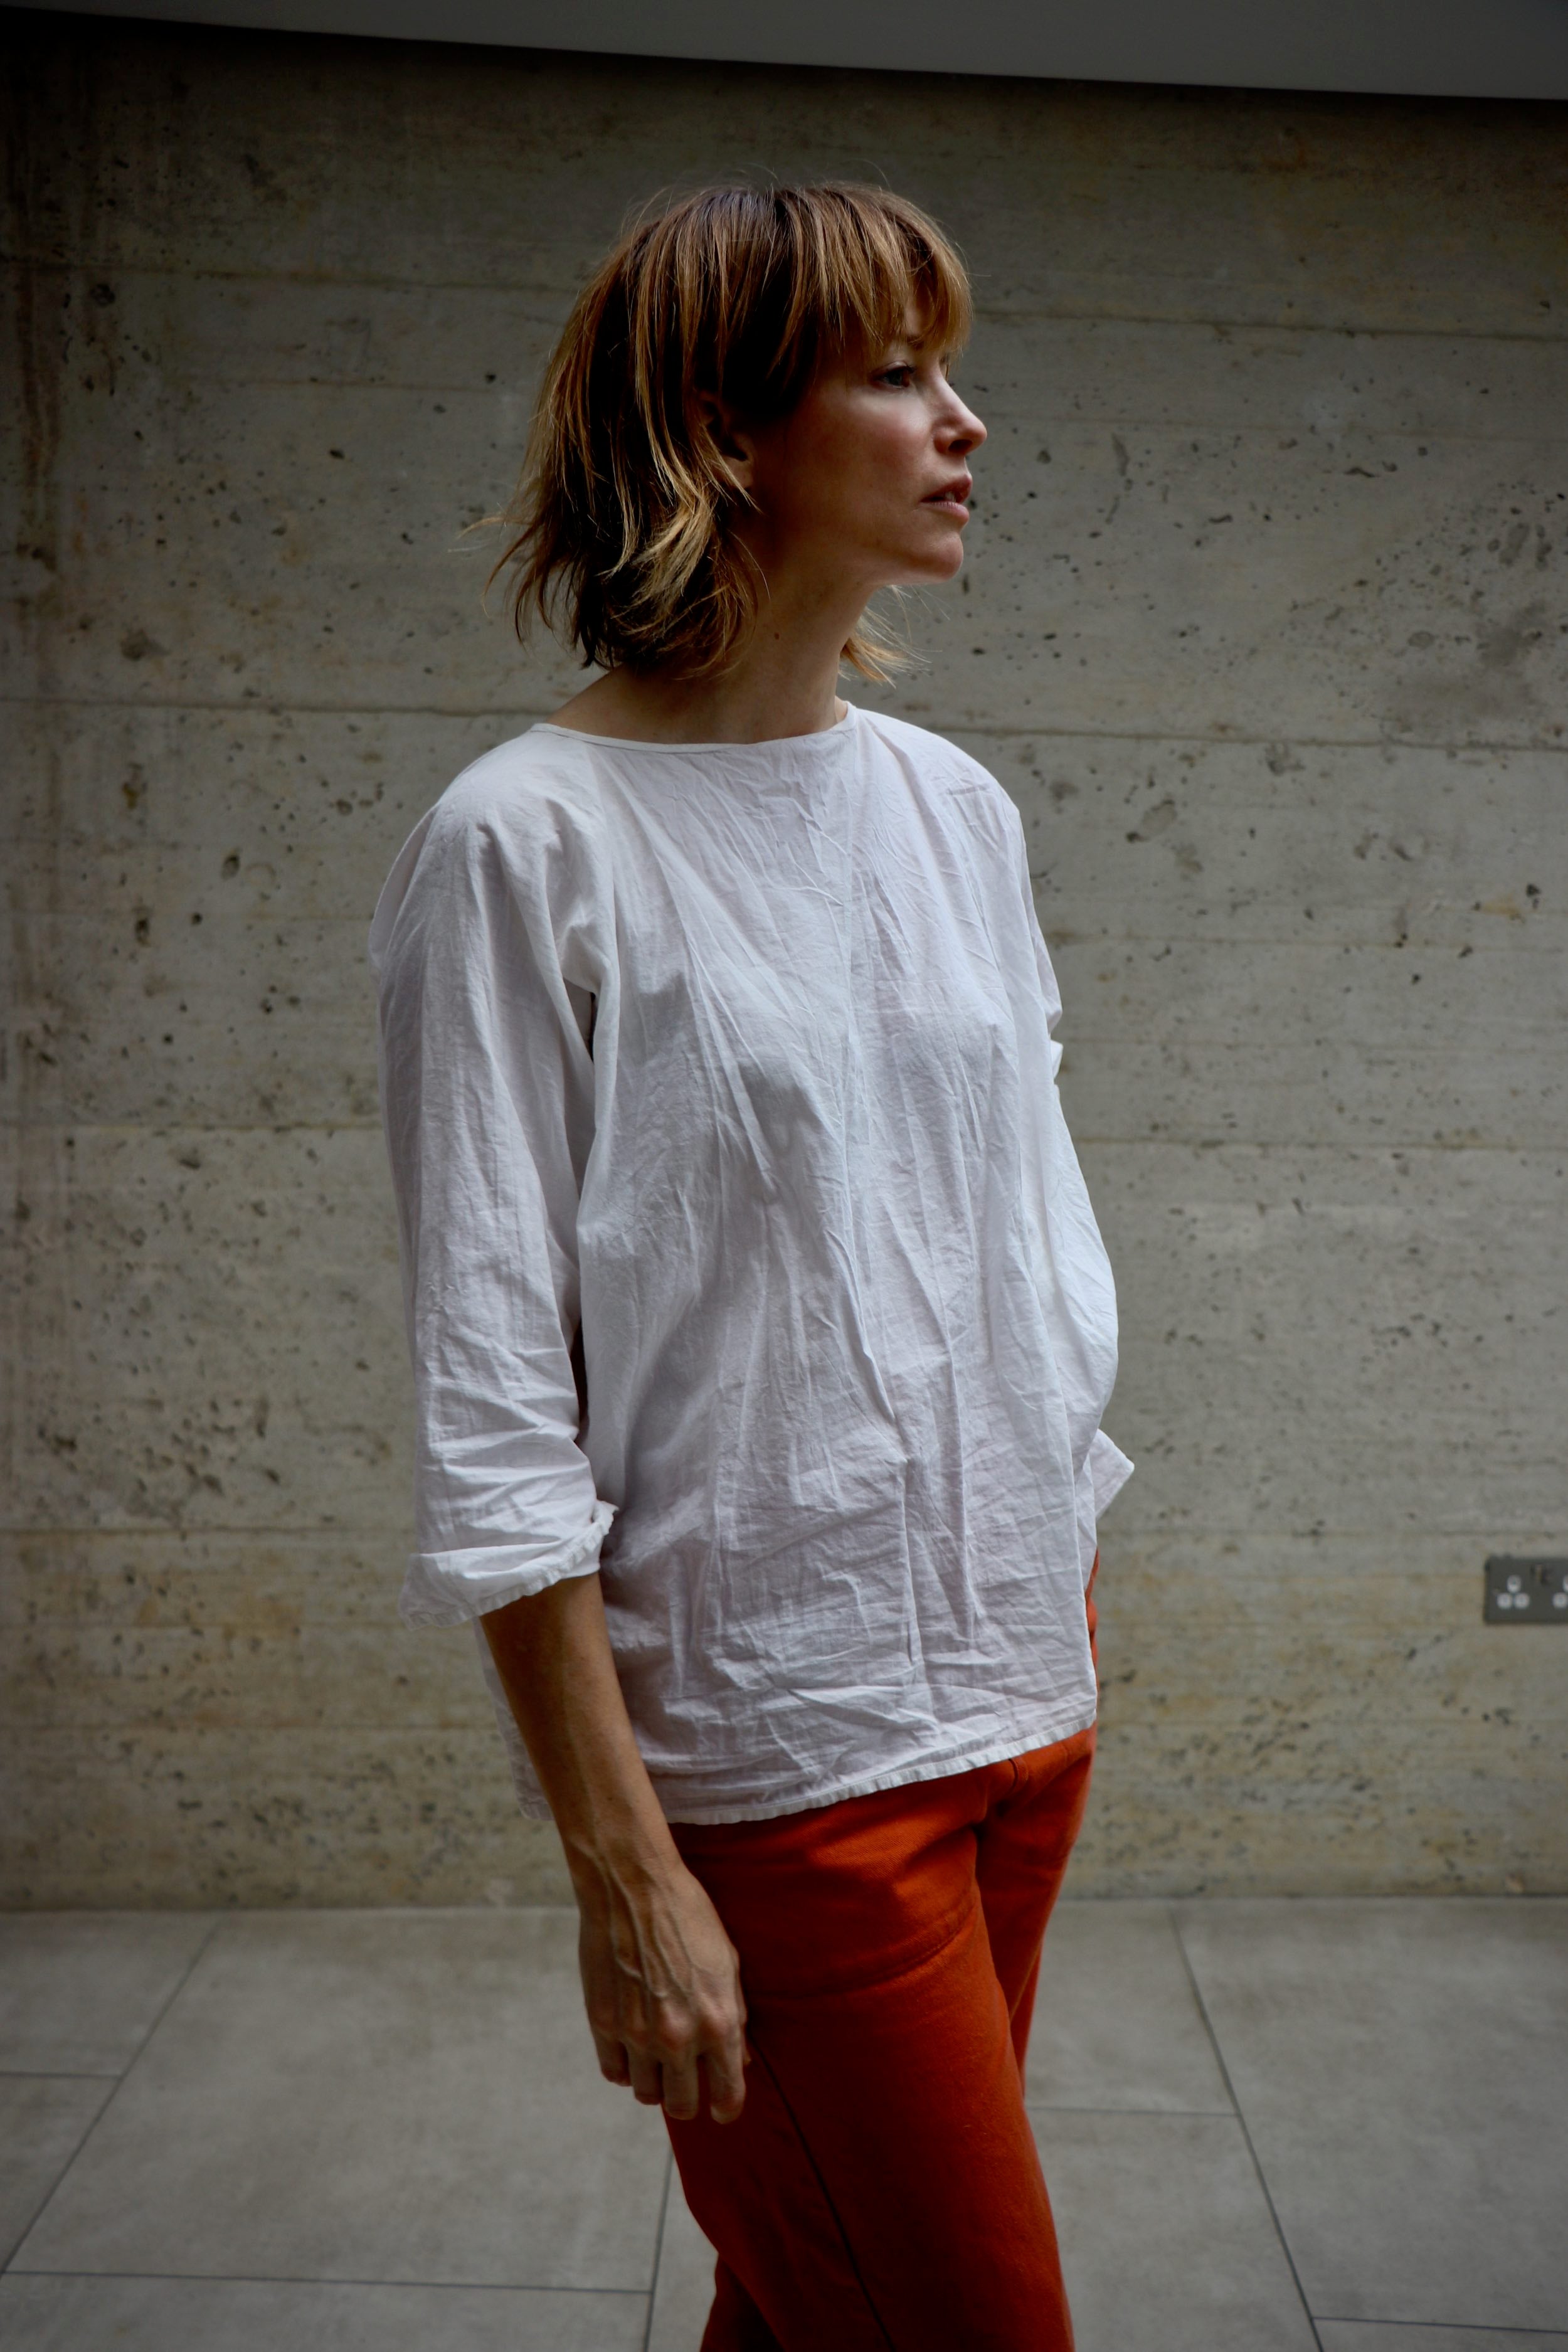 Woman wears Carrier Company White Cotton Tee Shirt with Women's Work trouser in Orange